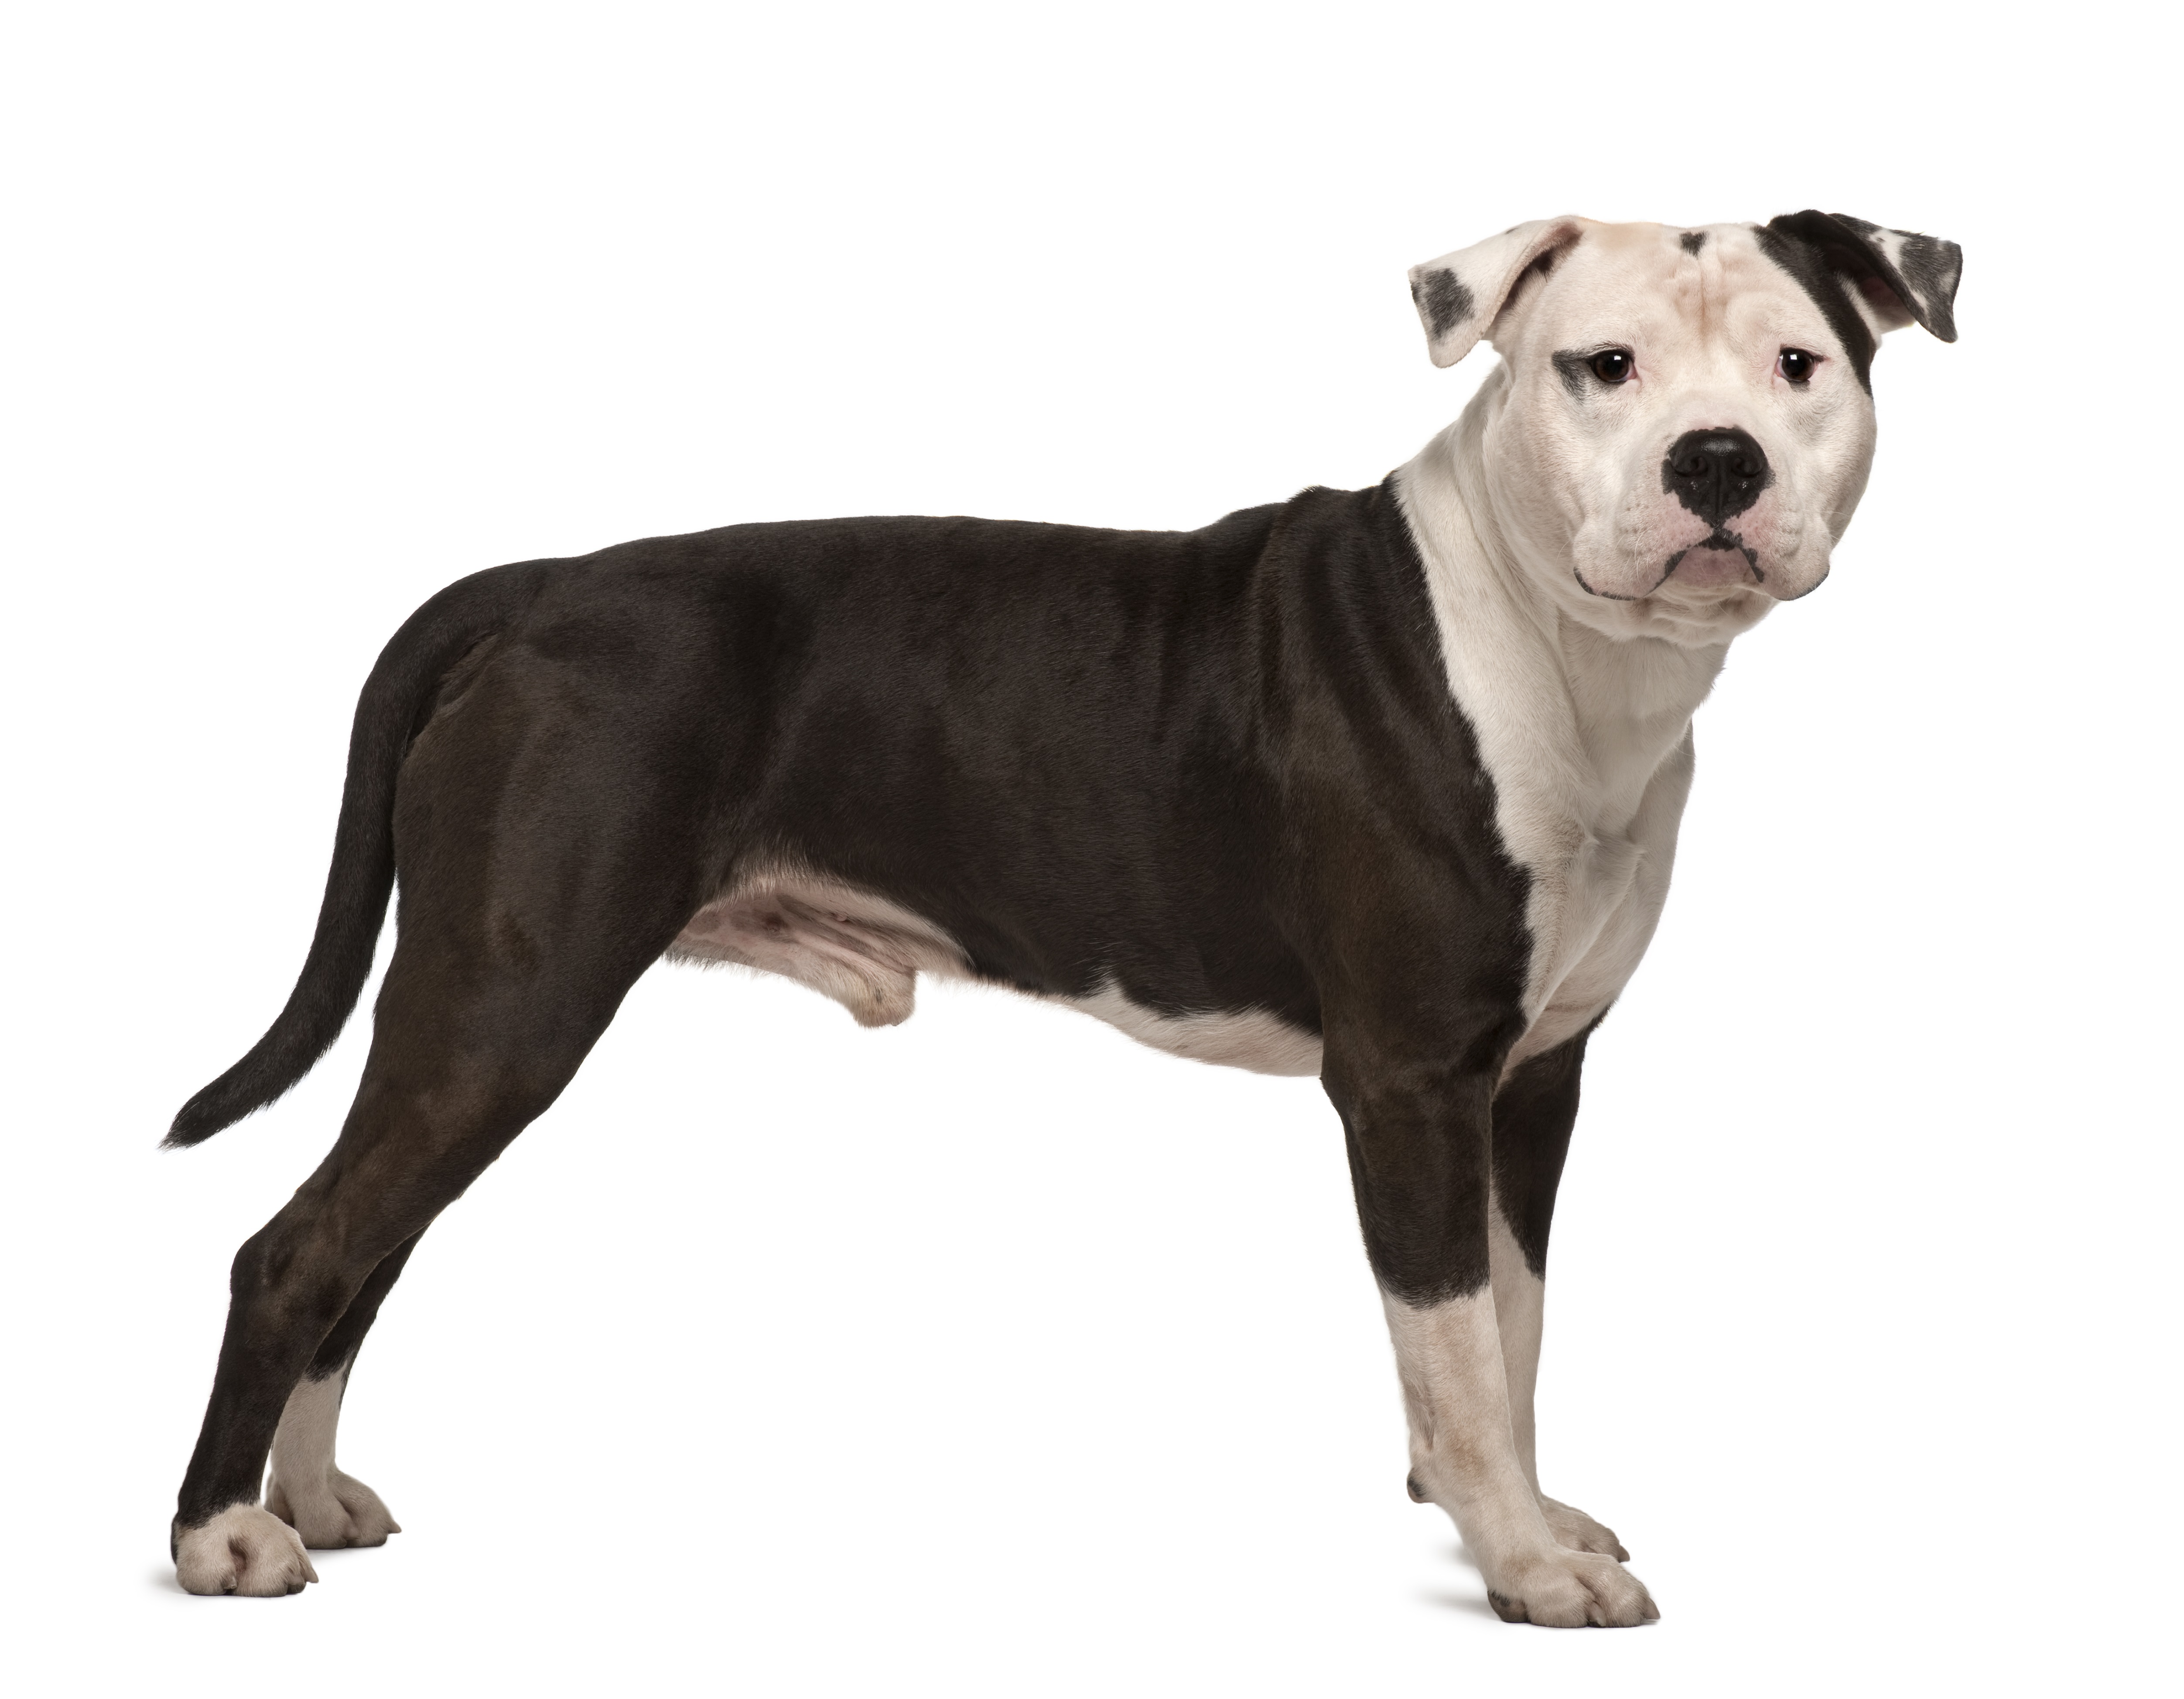 is a pitbull a medium or large breed